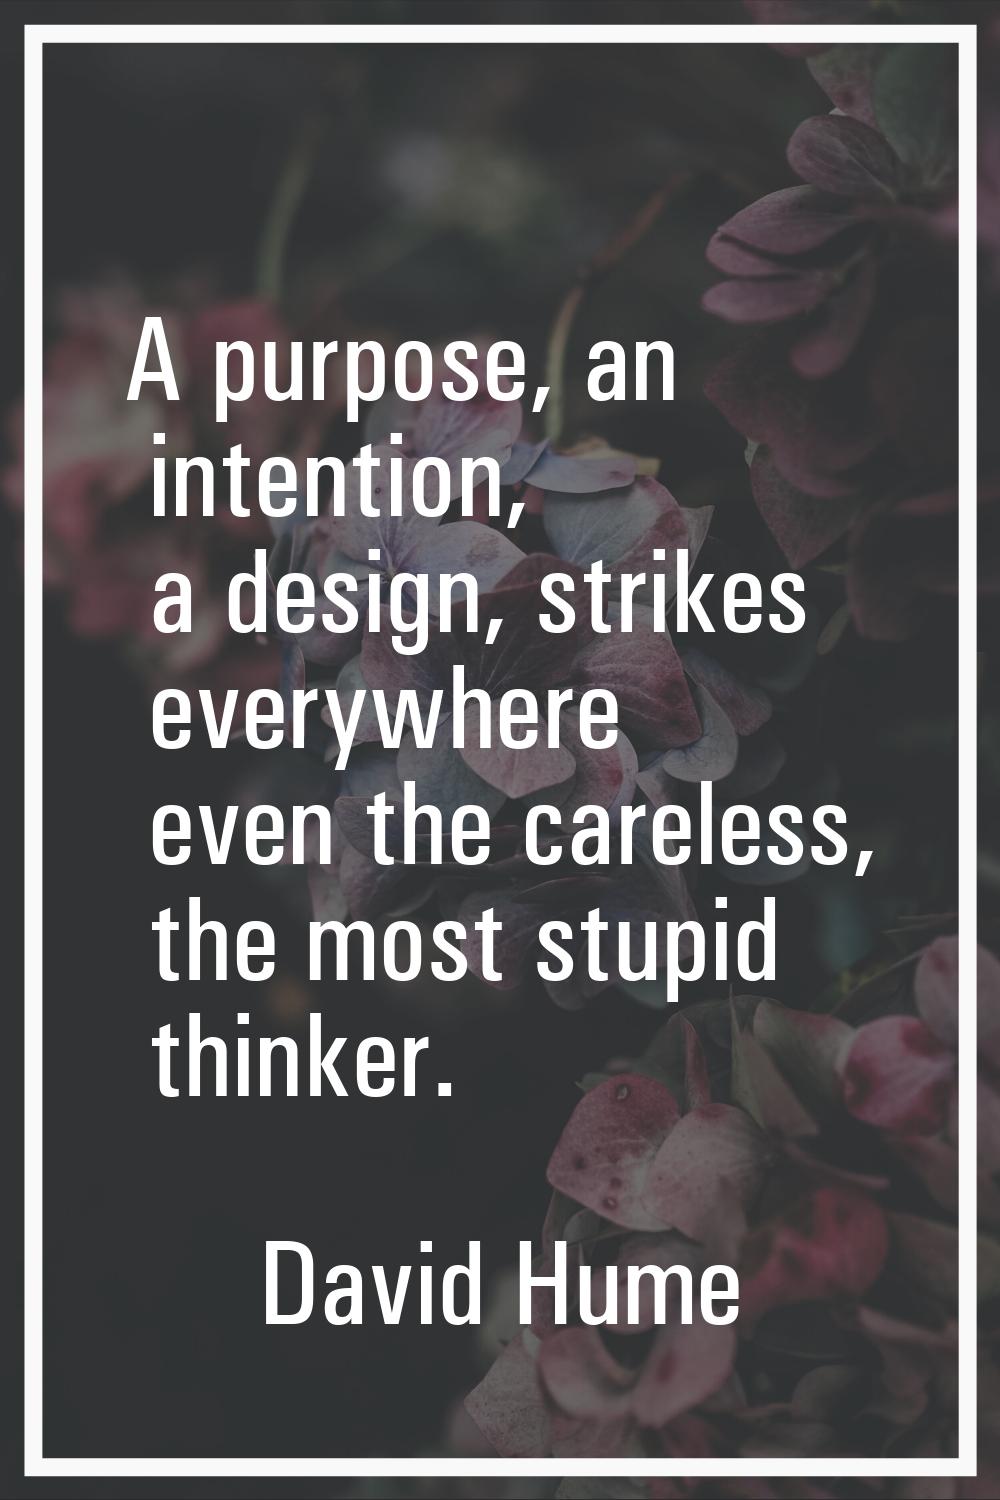 A purpose, an intention, a design, strikes everywhere even the careless, the most stupid thinker.